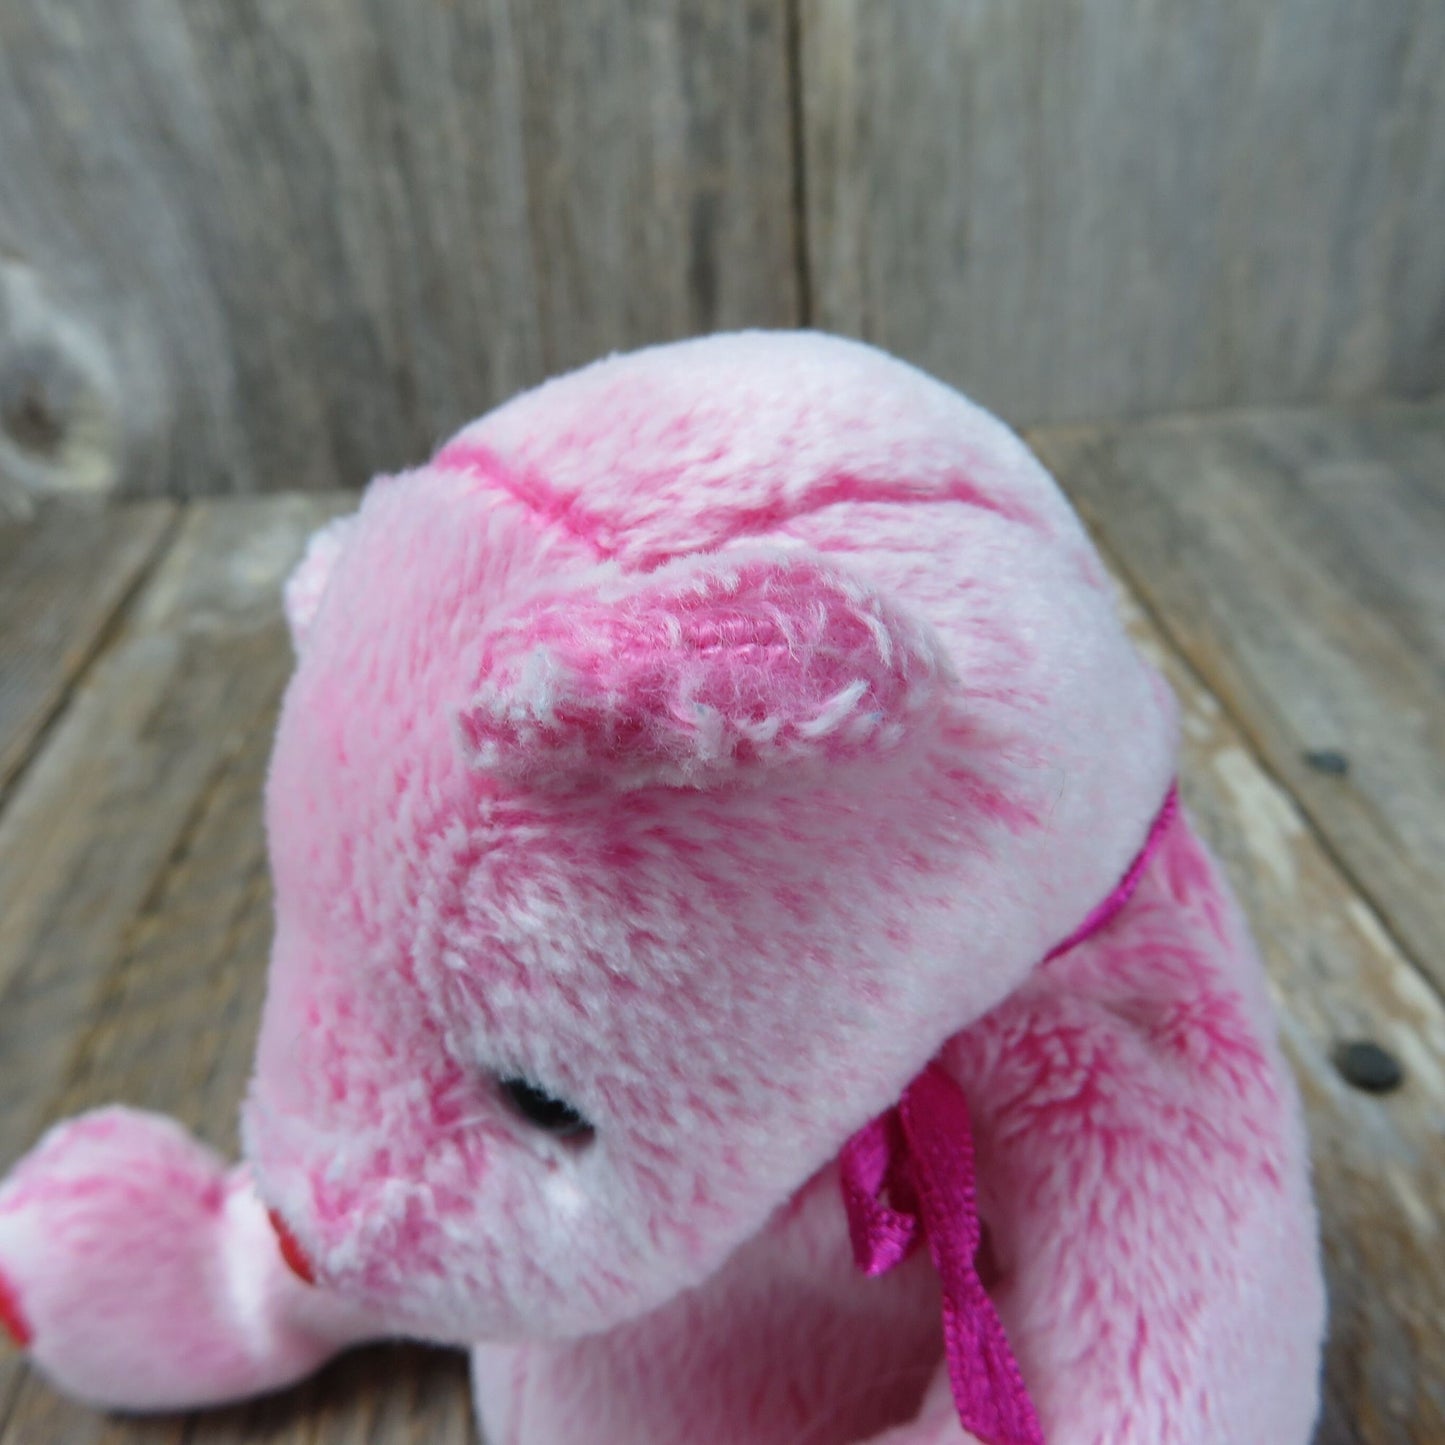 Pink Bear Plush Beanie Baby Romance Heart Nose Red Heart Paws Ty 2001 Stuffed Animal